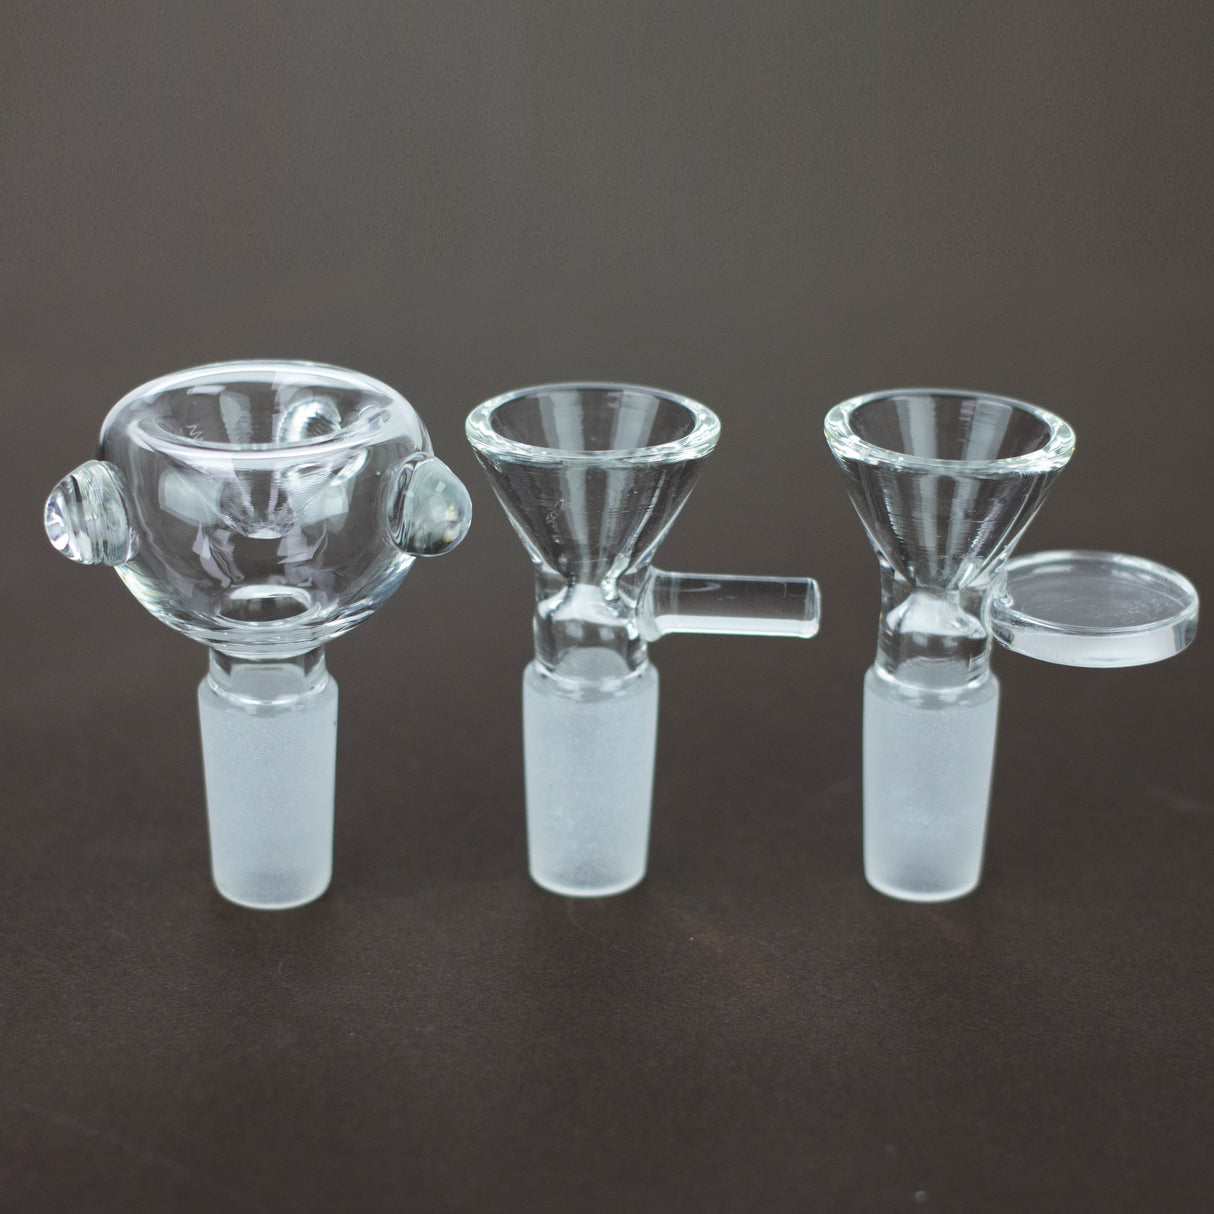 Clear thick glass bowl for 14 mm